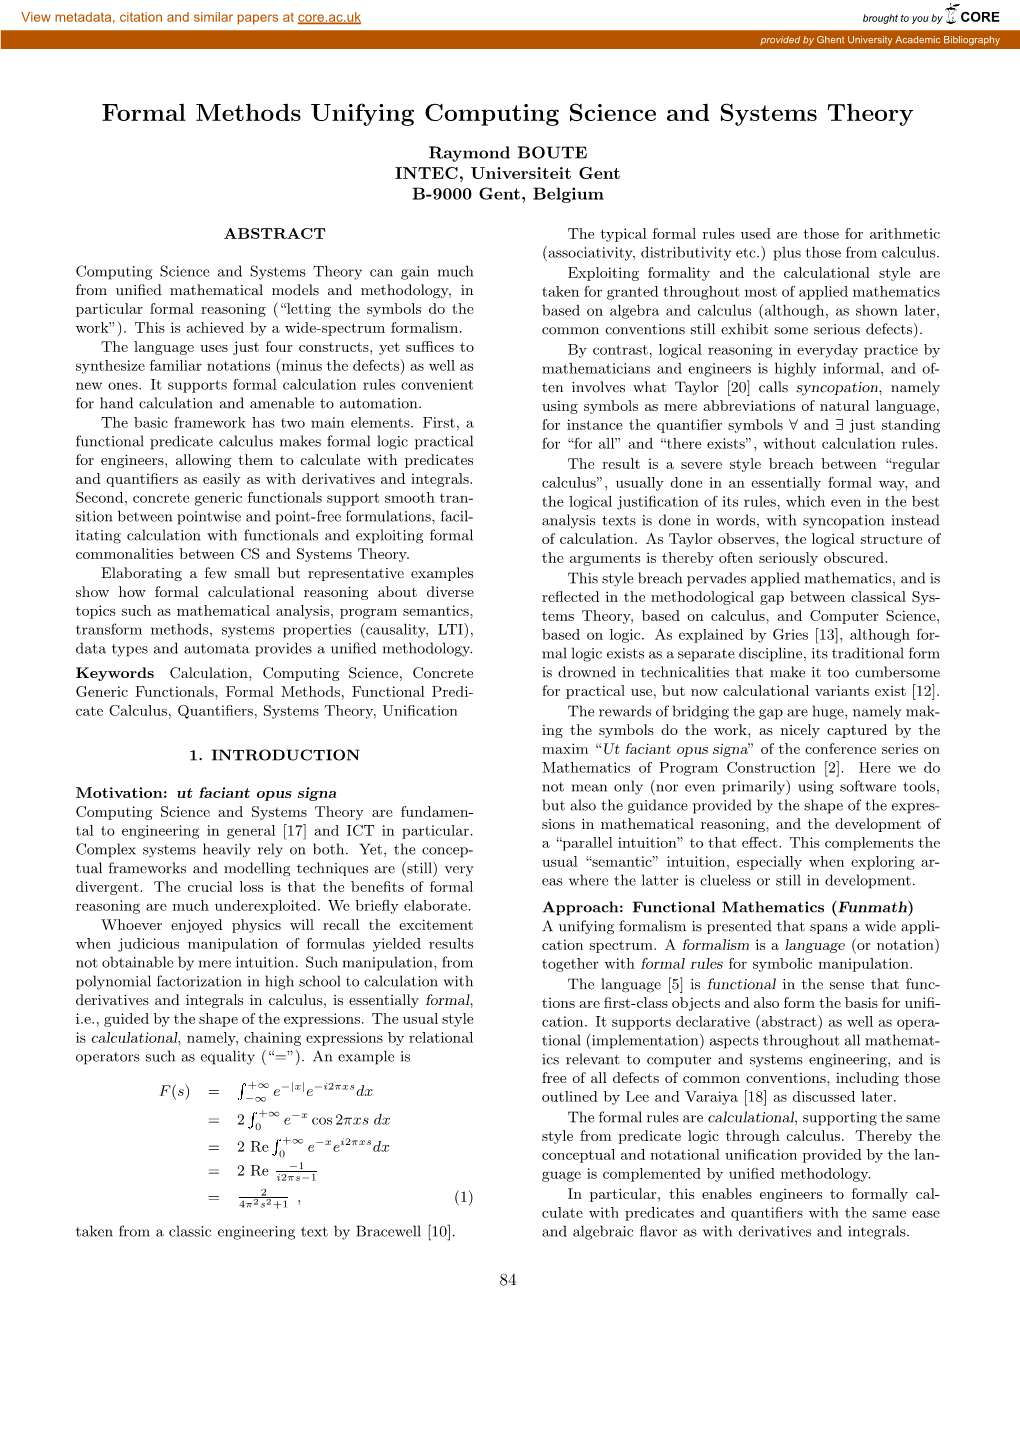 Formal Methods Unifying Computing Science and Systems Theory